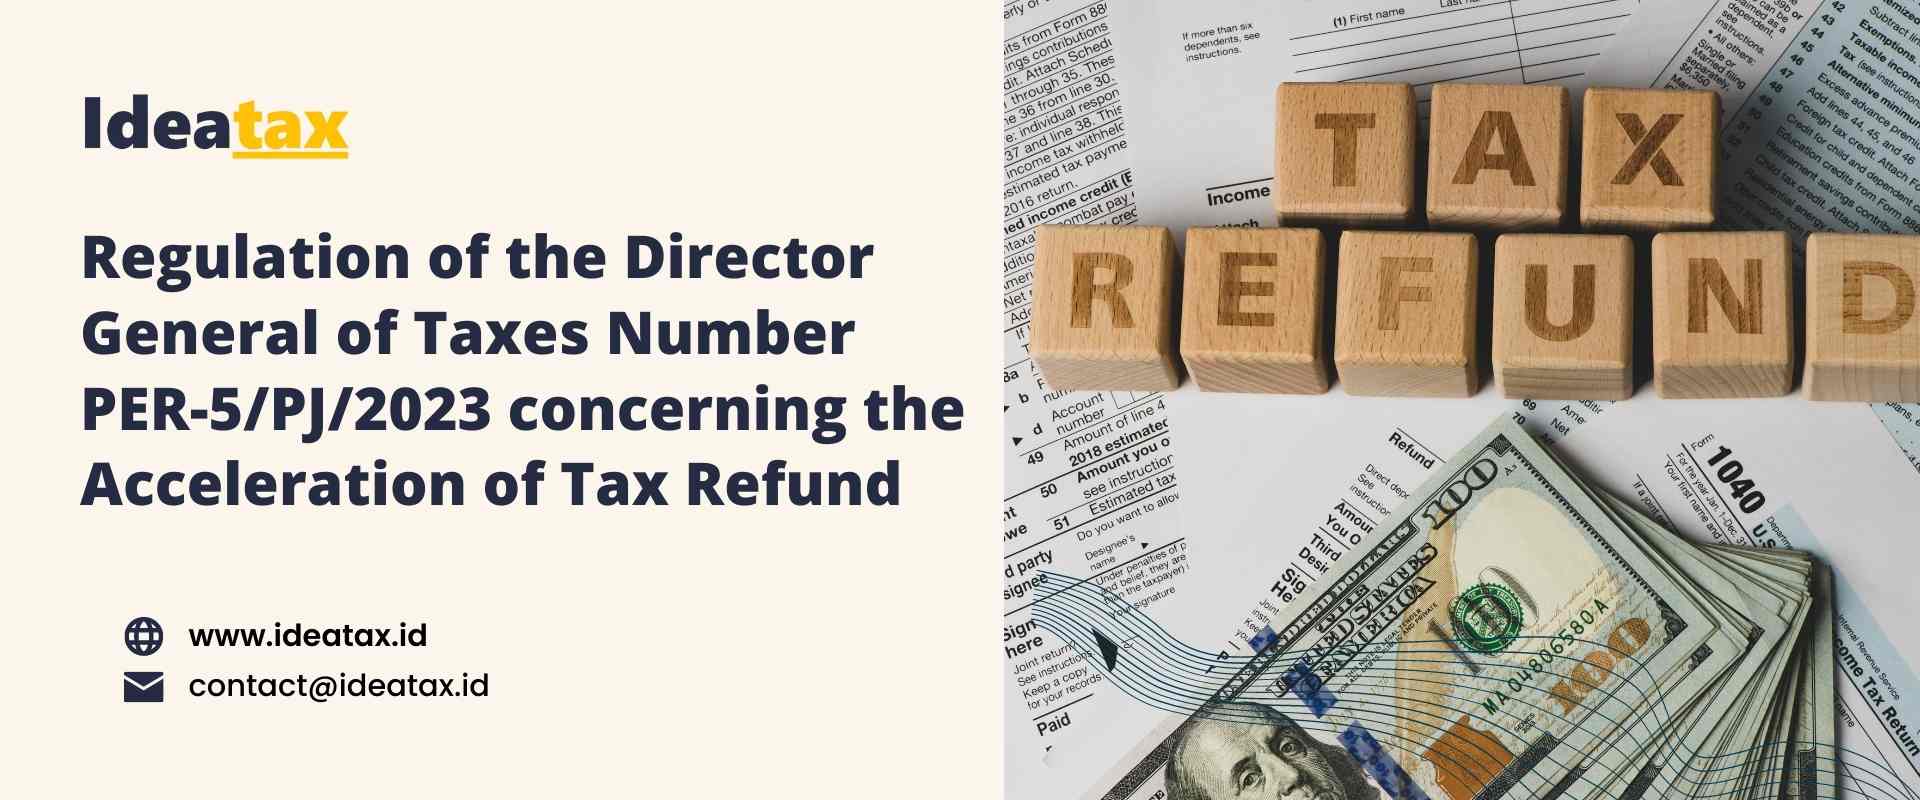 Regulation of the DGT No. PER-5/PJ/2023 concerning the Acceleration of Tax Refund